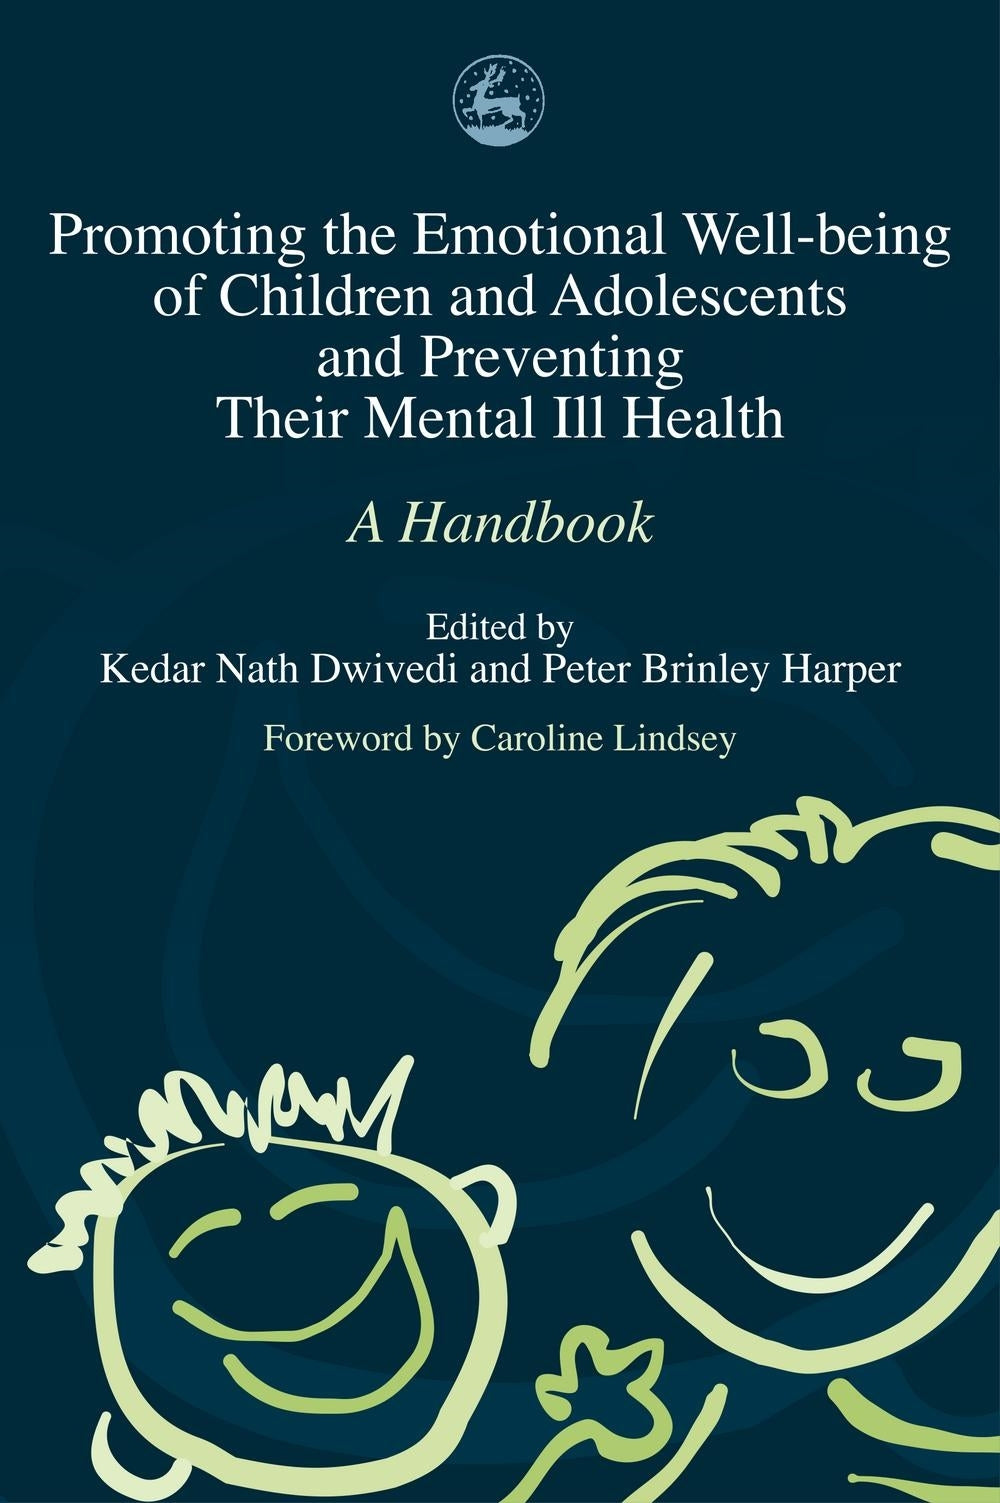 Promoting the Emotional Well Being of Children and Adolescents and Preventing Their Mental Ill Health by No Author Listed, Peter Harper, Kedar Nath Dwivedi